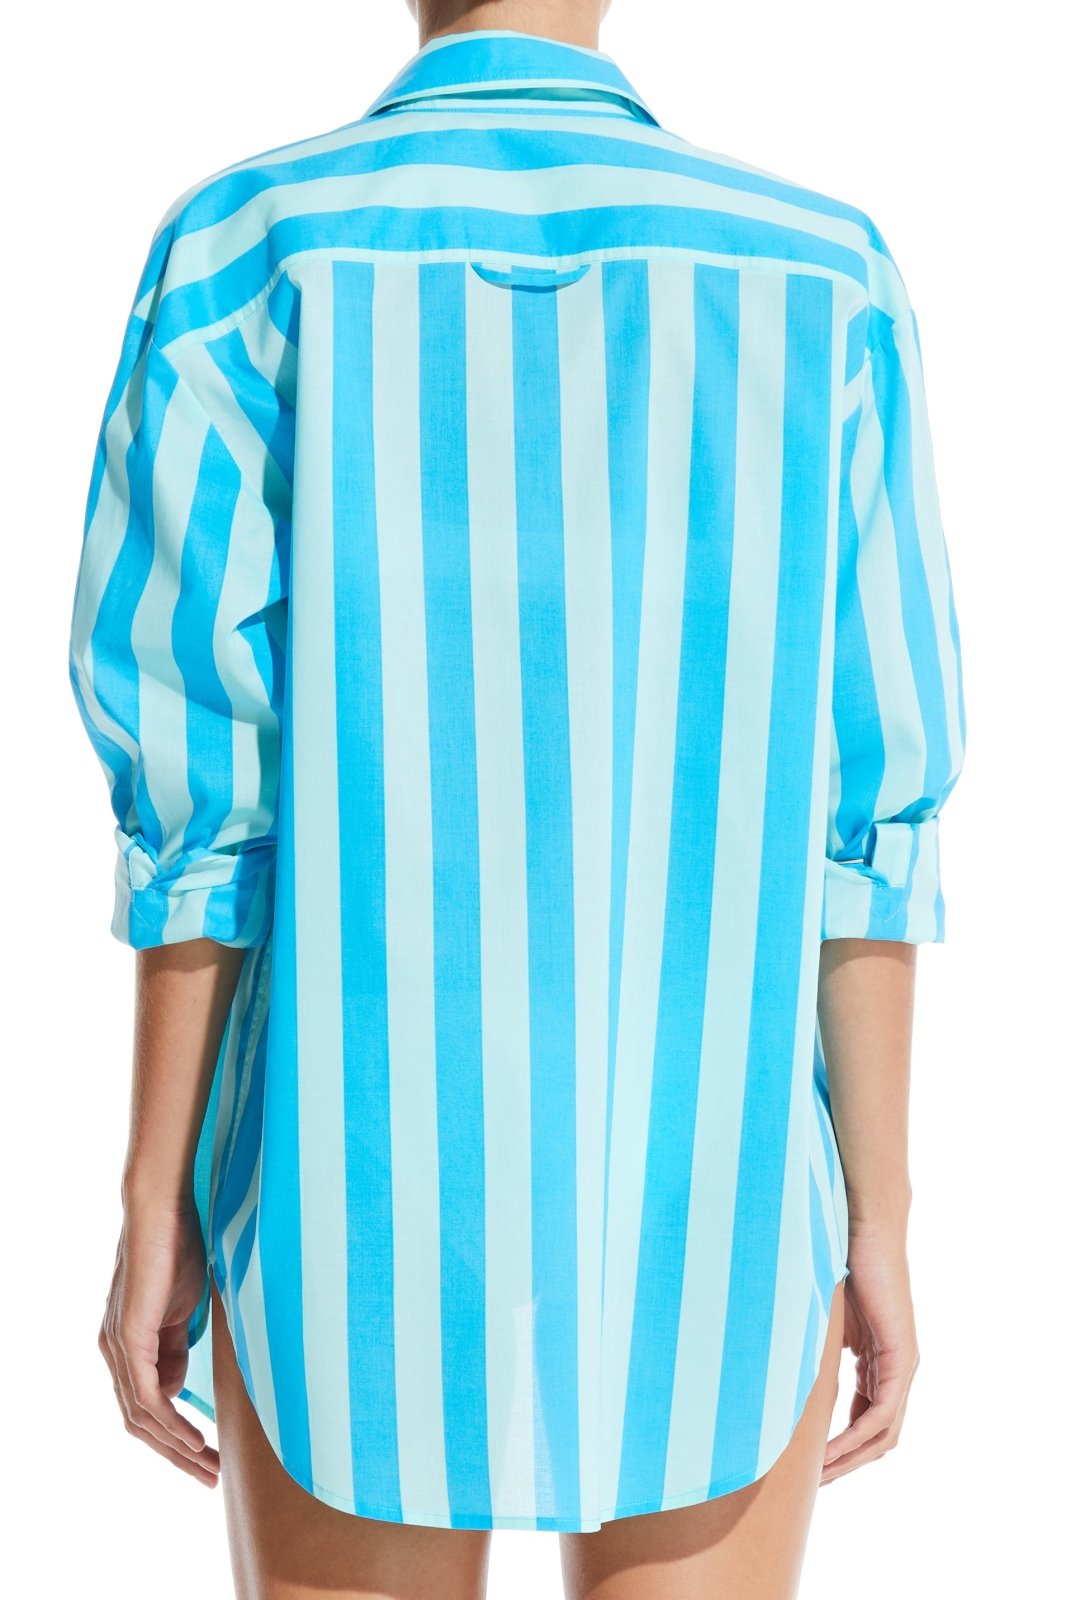 The Arlette Shirt - Solid & Striped